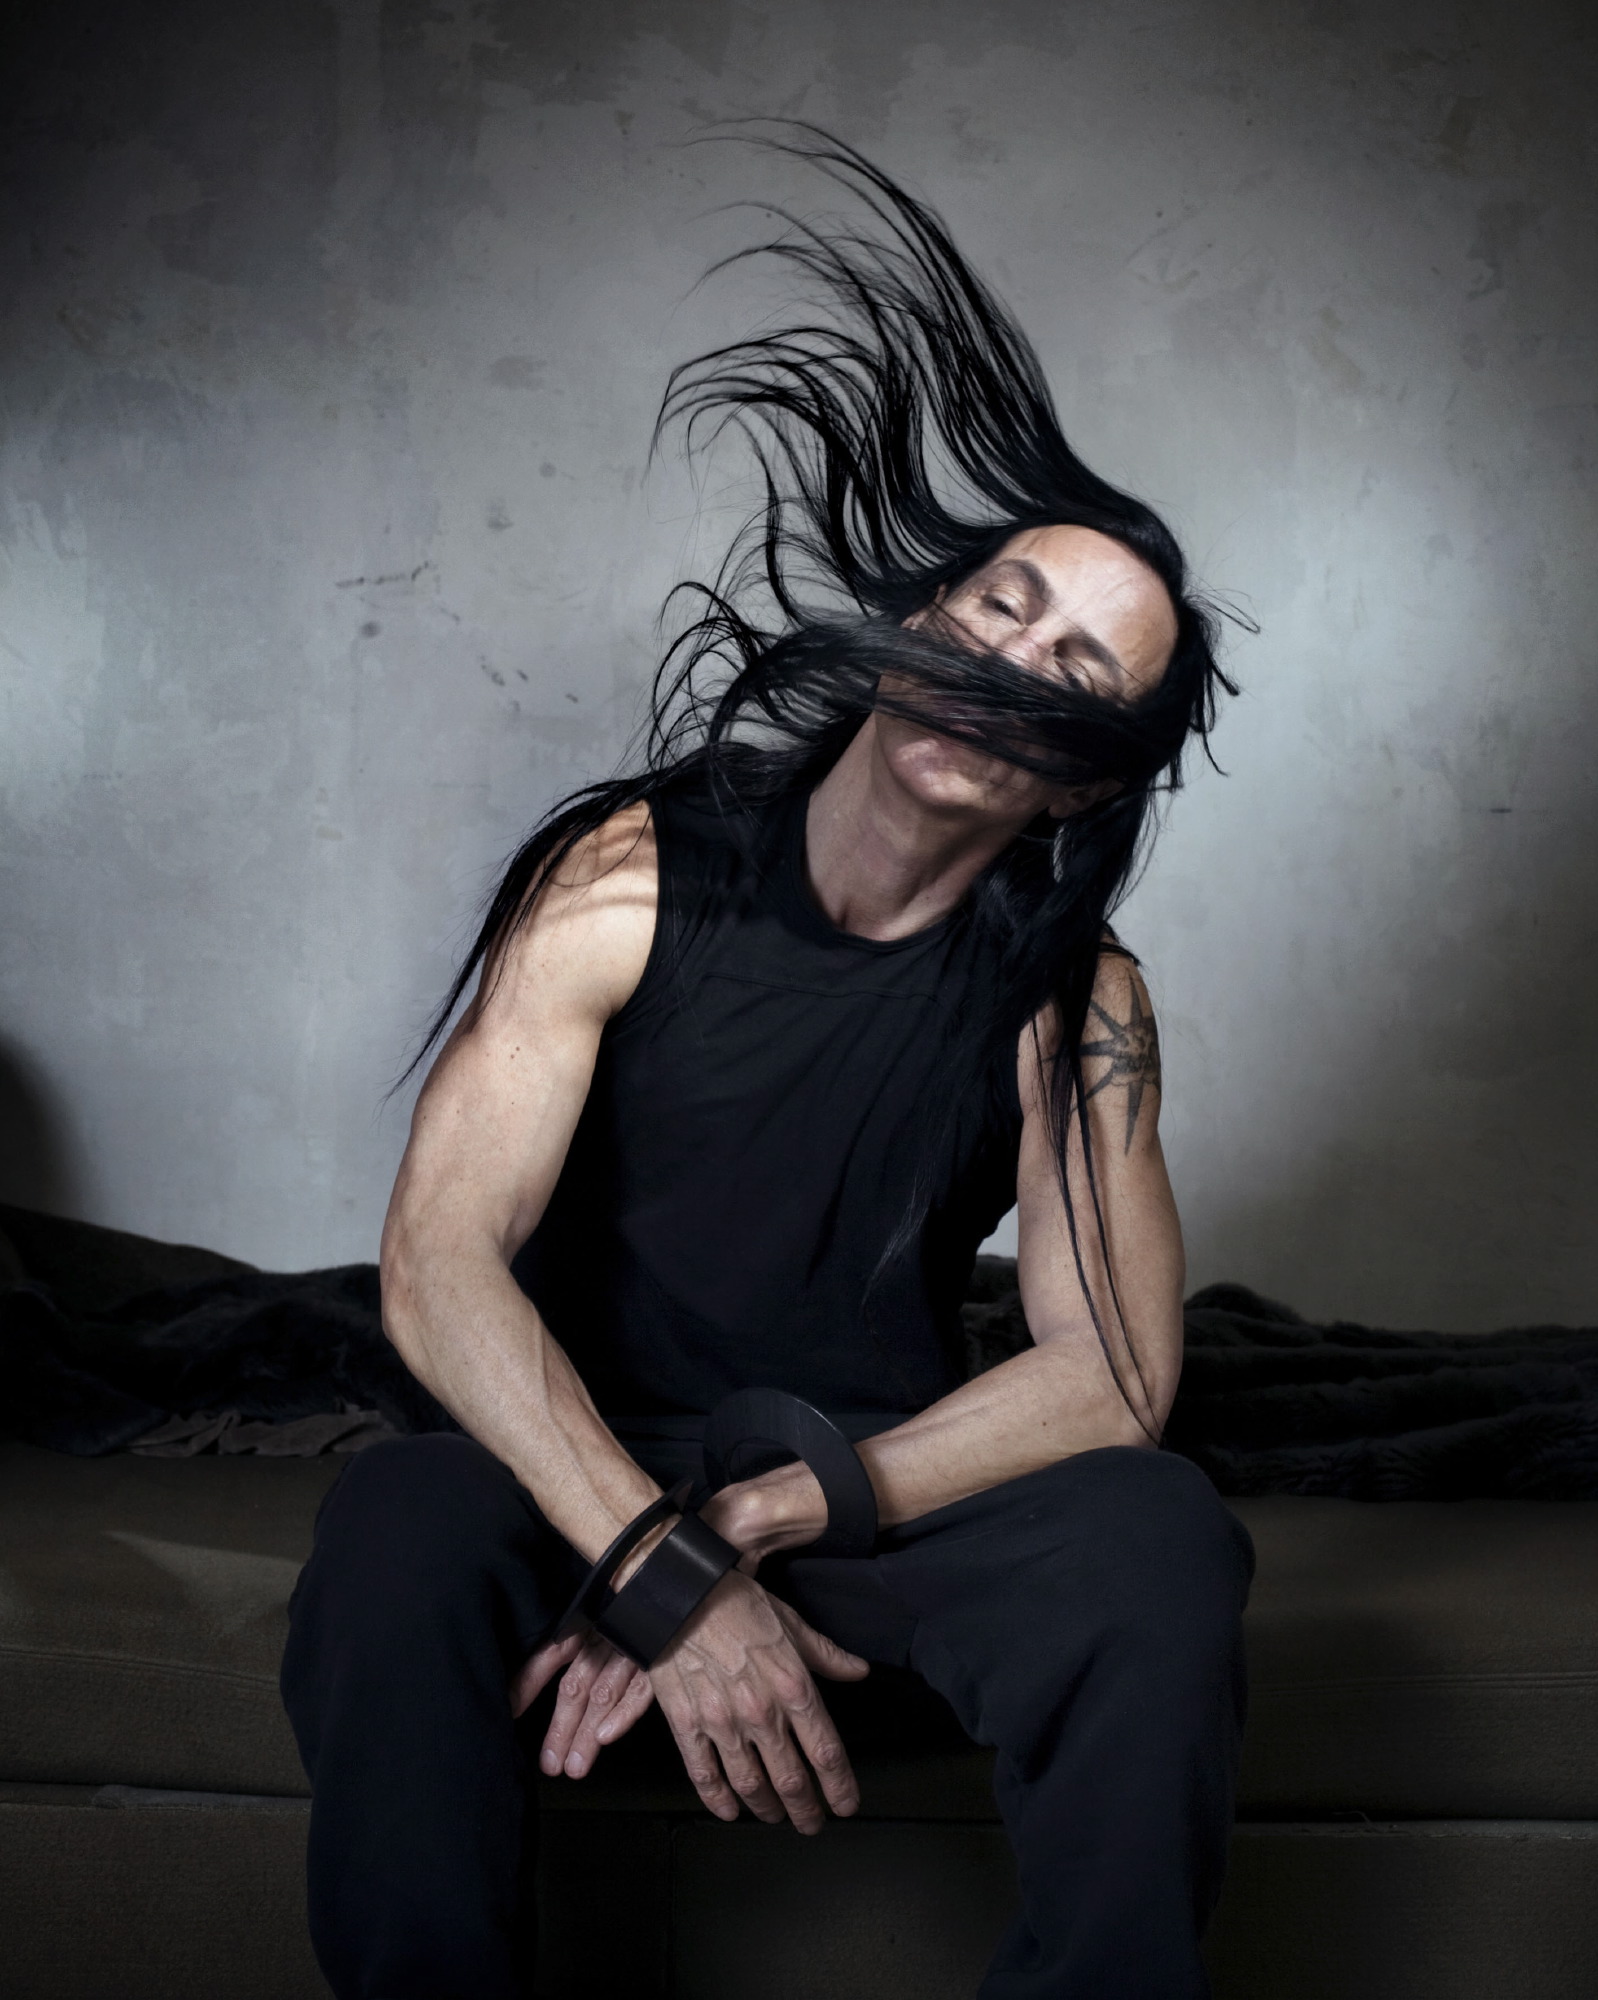  RICK OWENS FOR THE INDEPENDENT 